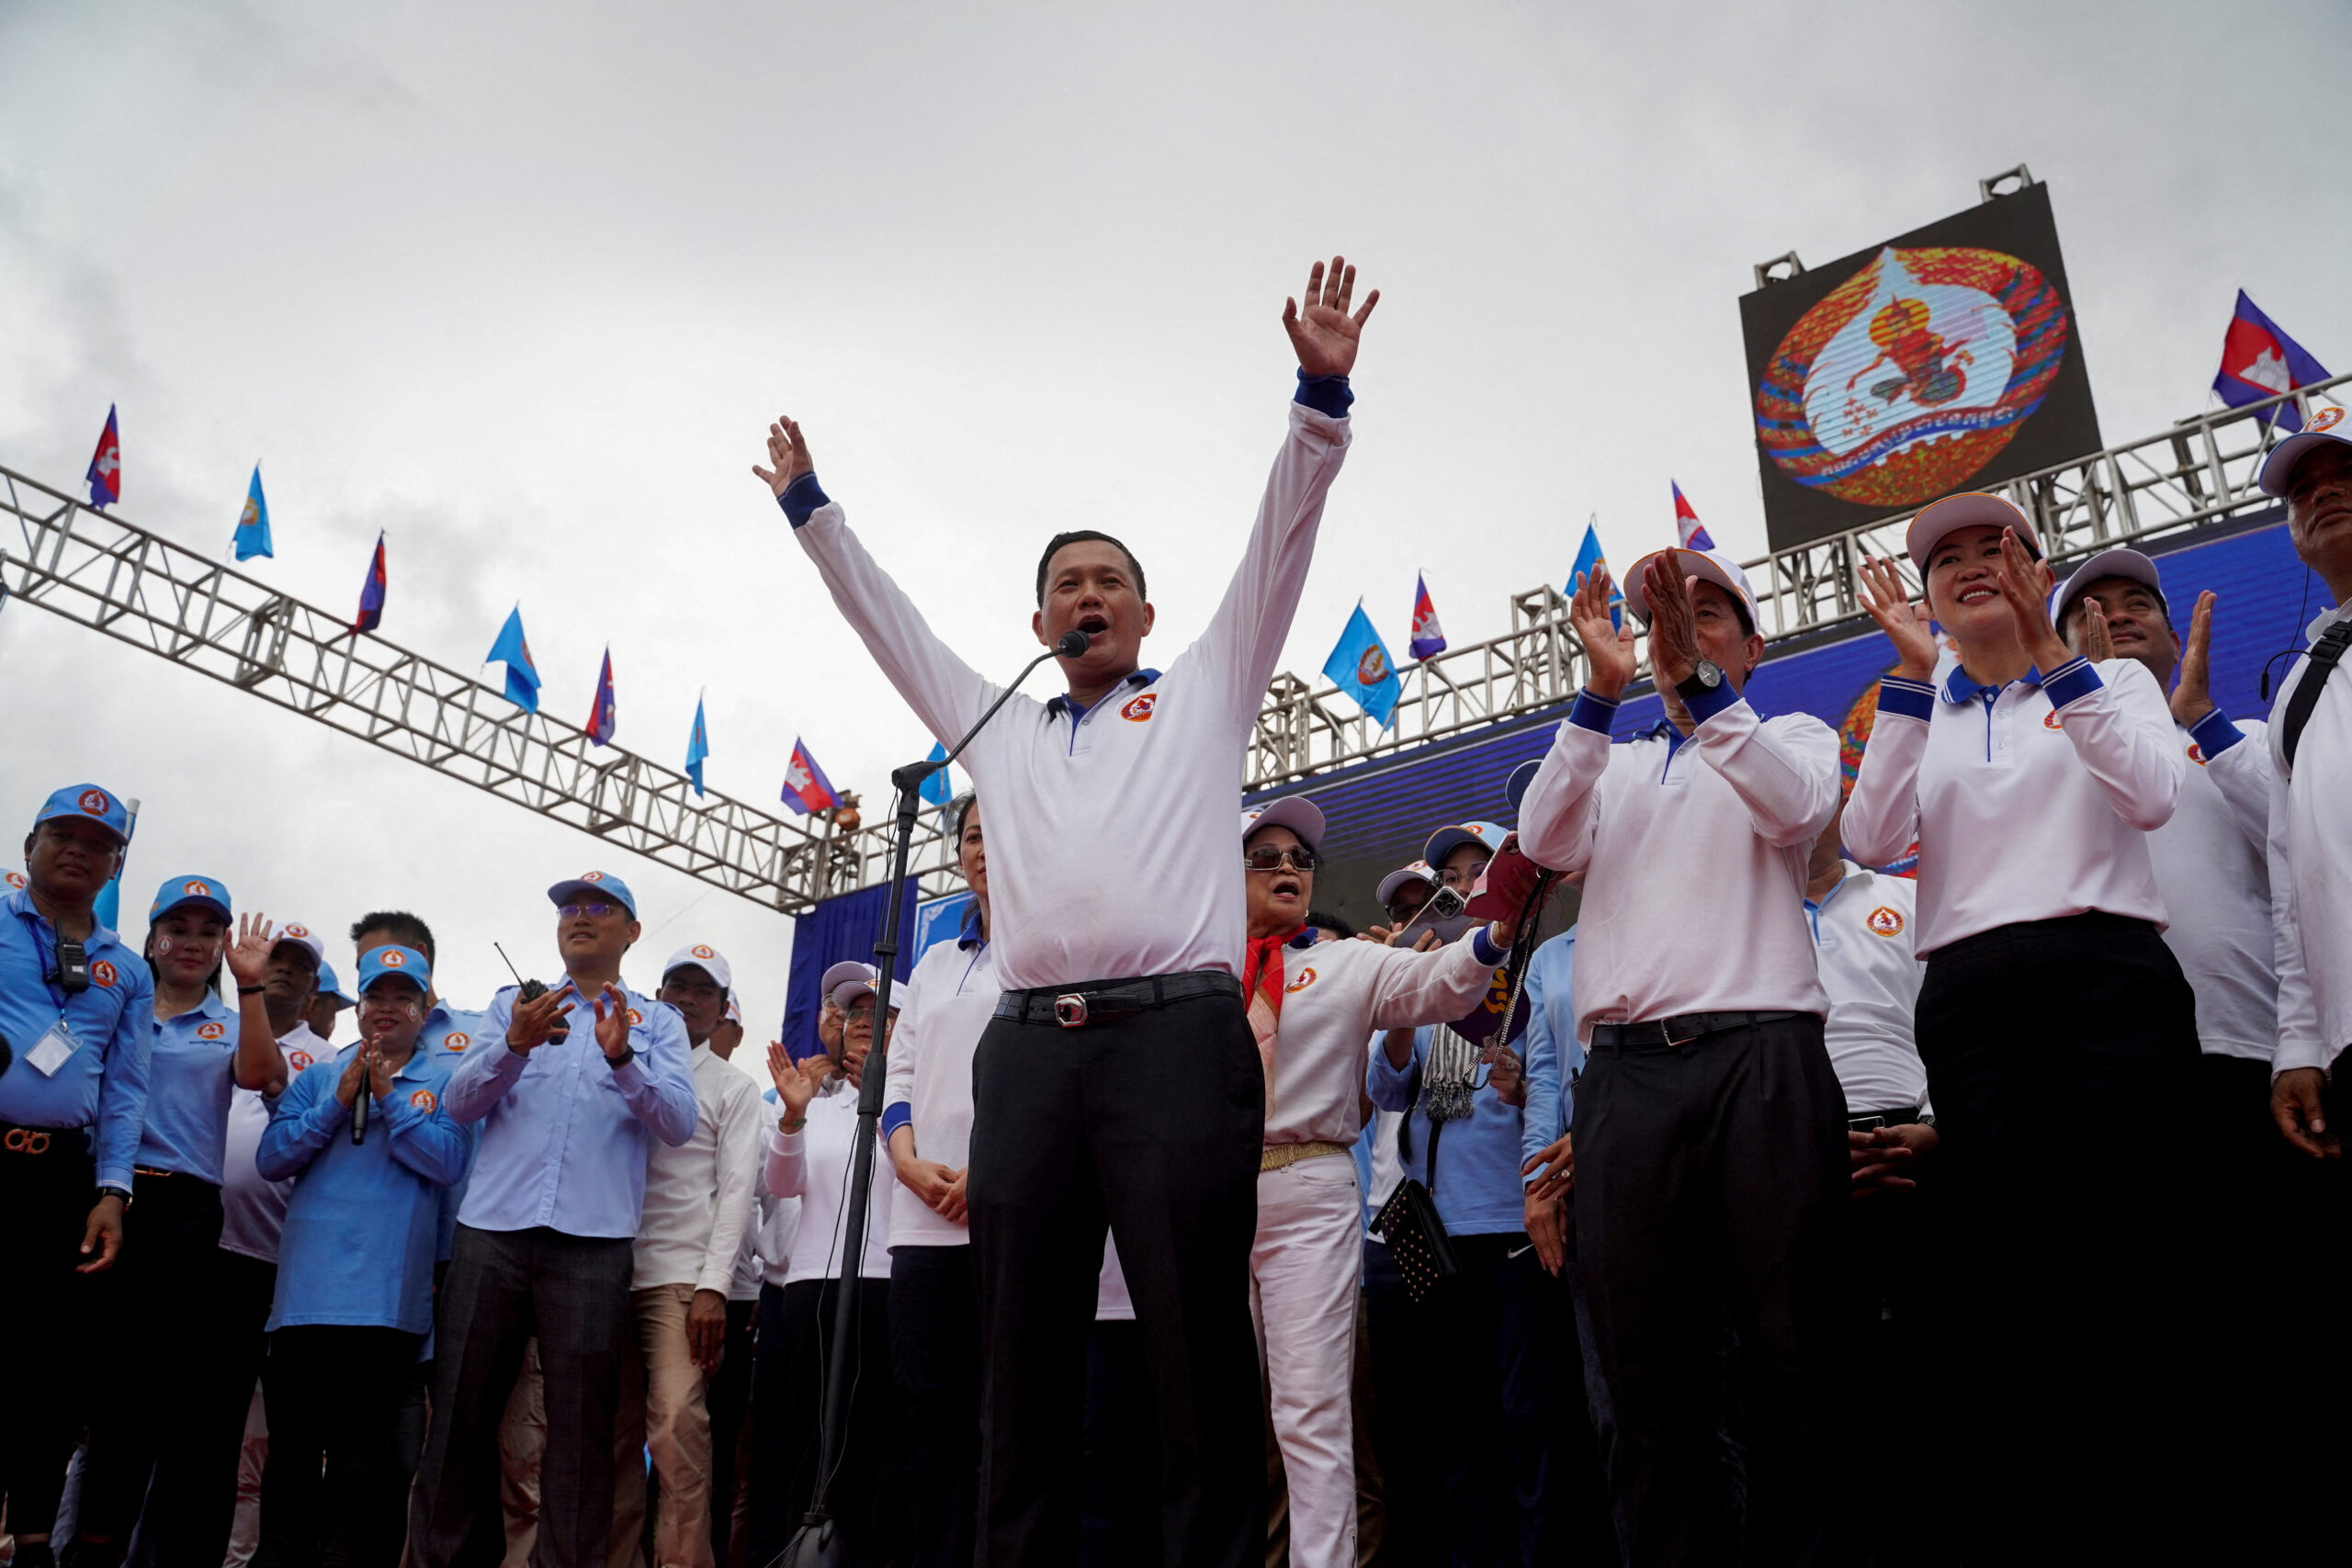 At the final election rally of the Cambodian People's Party (CPP) on Friday, Hun Manet, the son of Cambodia's prime minister Hun Sen, addressed the crowd.
